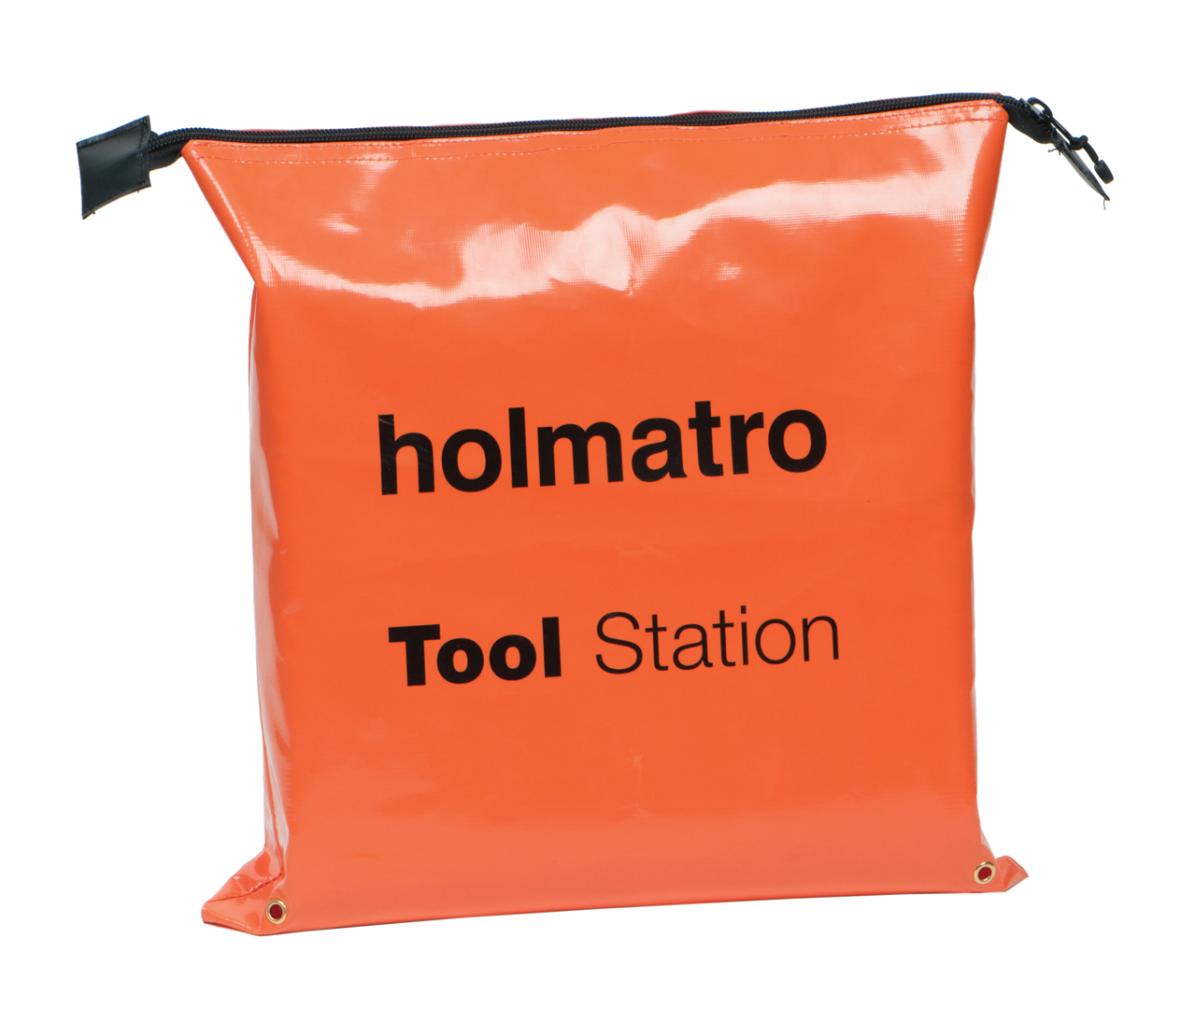 Tool Station (in bag)